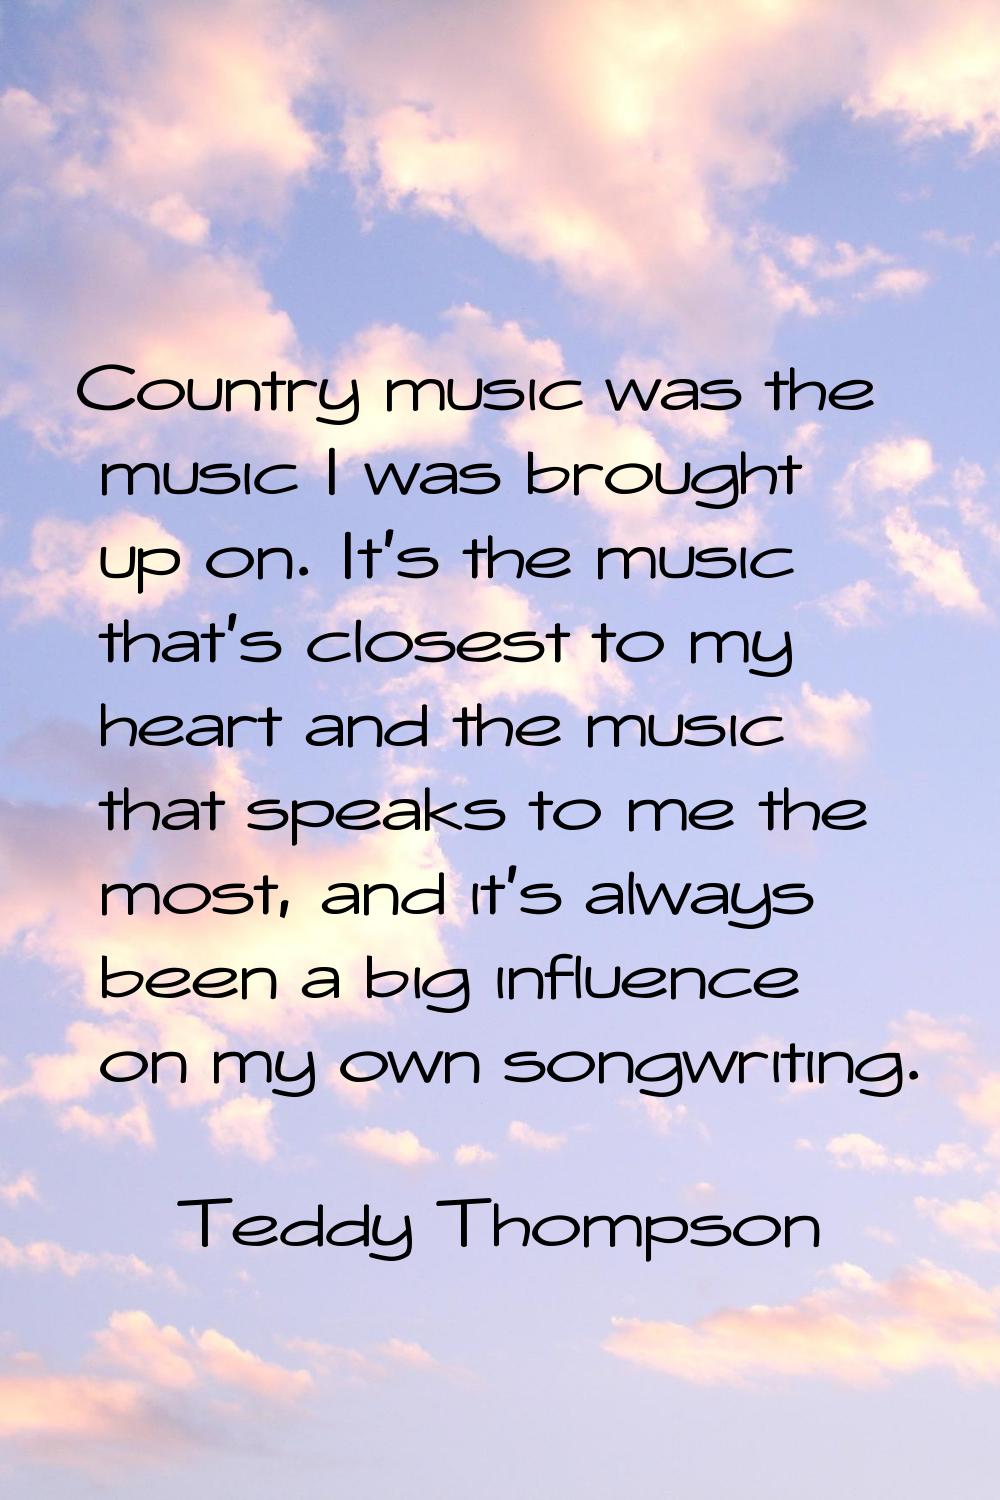 Country music was the music I was brought up on. It's the music that's closest to my heart and the 